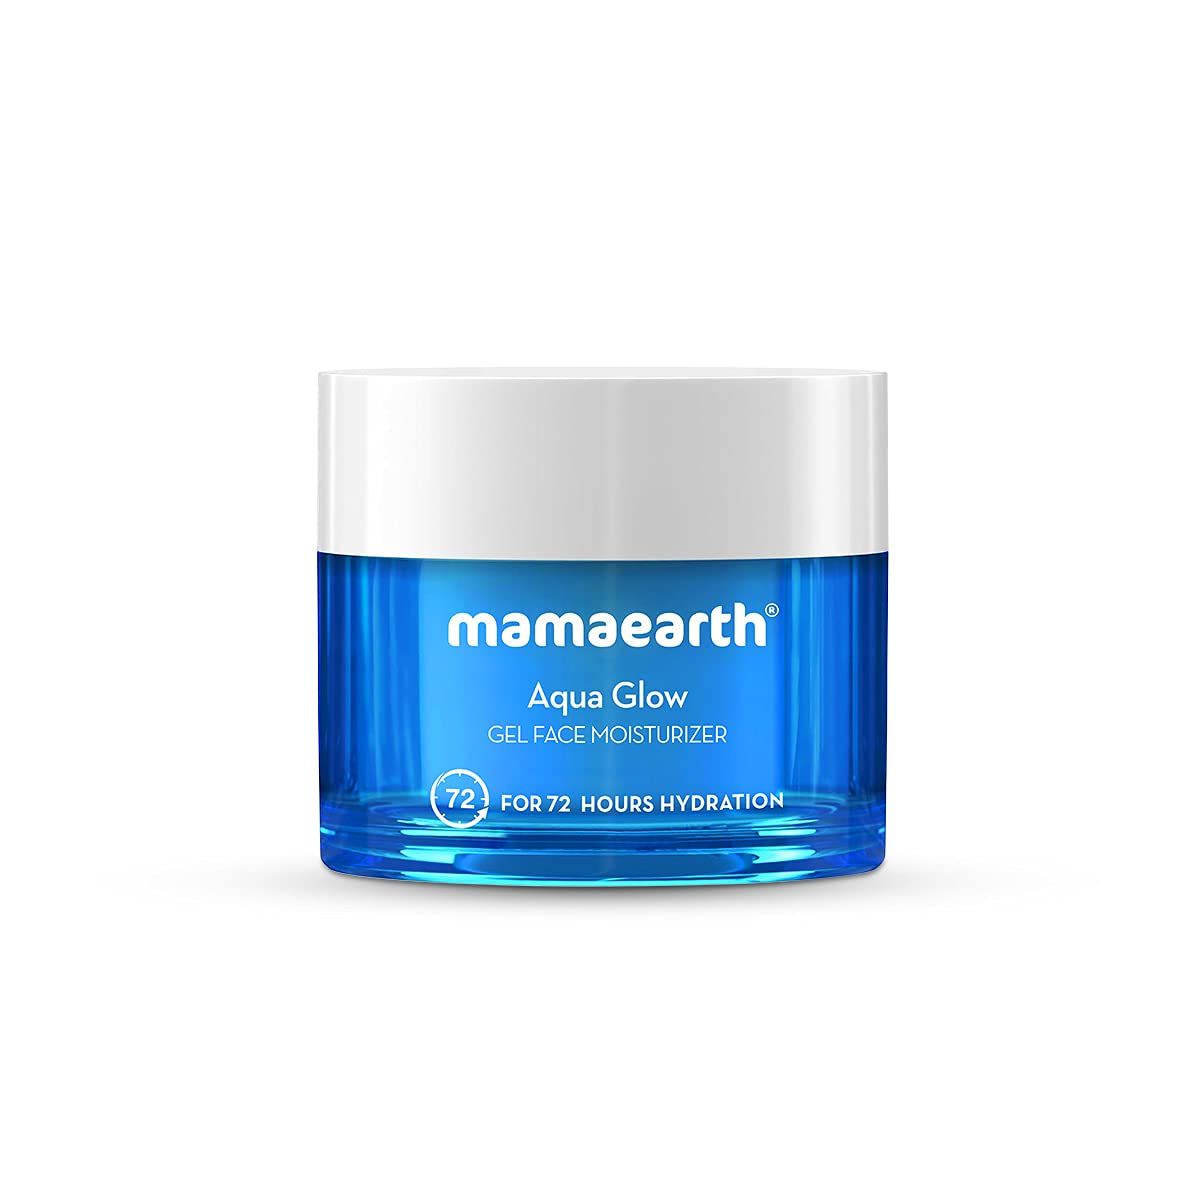 Buy Mamaearth Aqua Glow Gel Face Moisturizer With Himalayan Thermal Water and Hyaluronic Acid for 72 Hours Hydration (100 ml) - Purplle